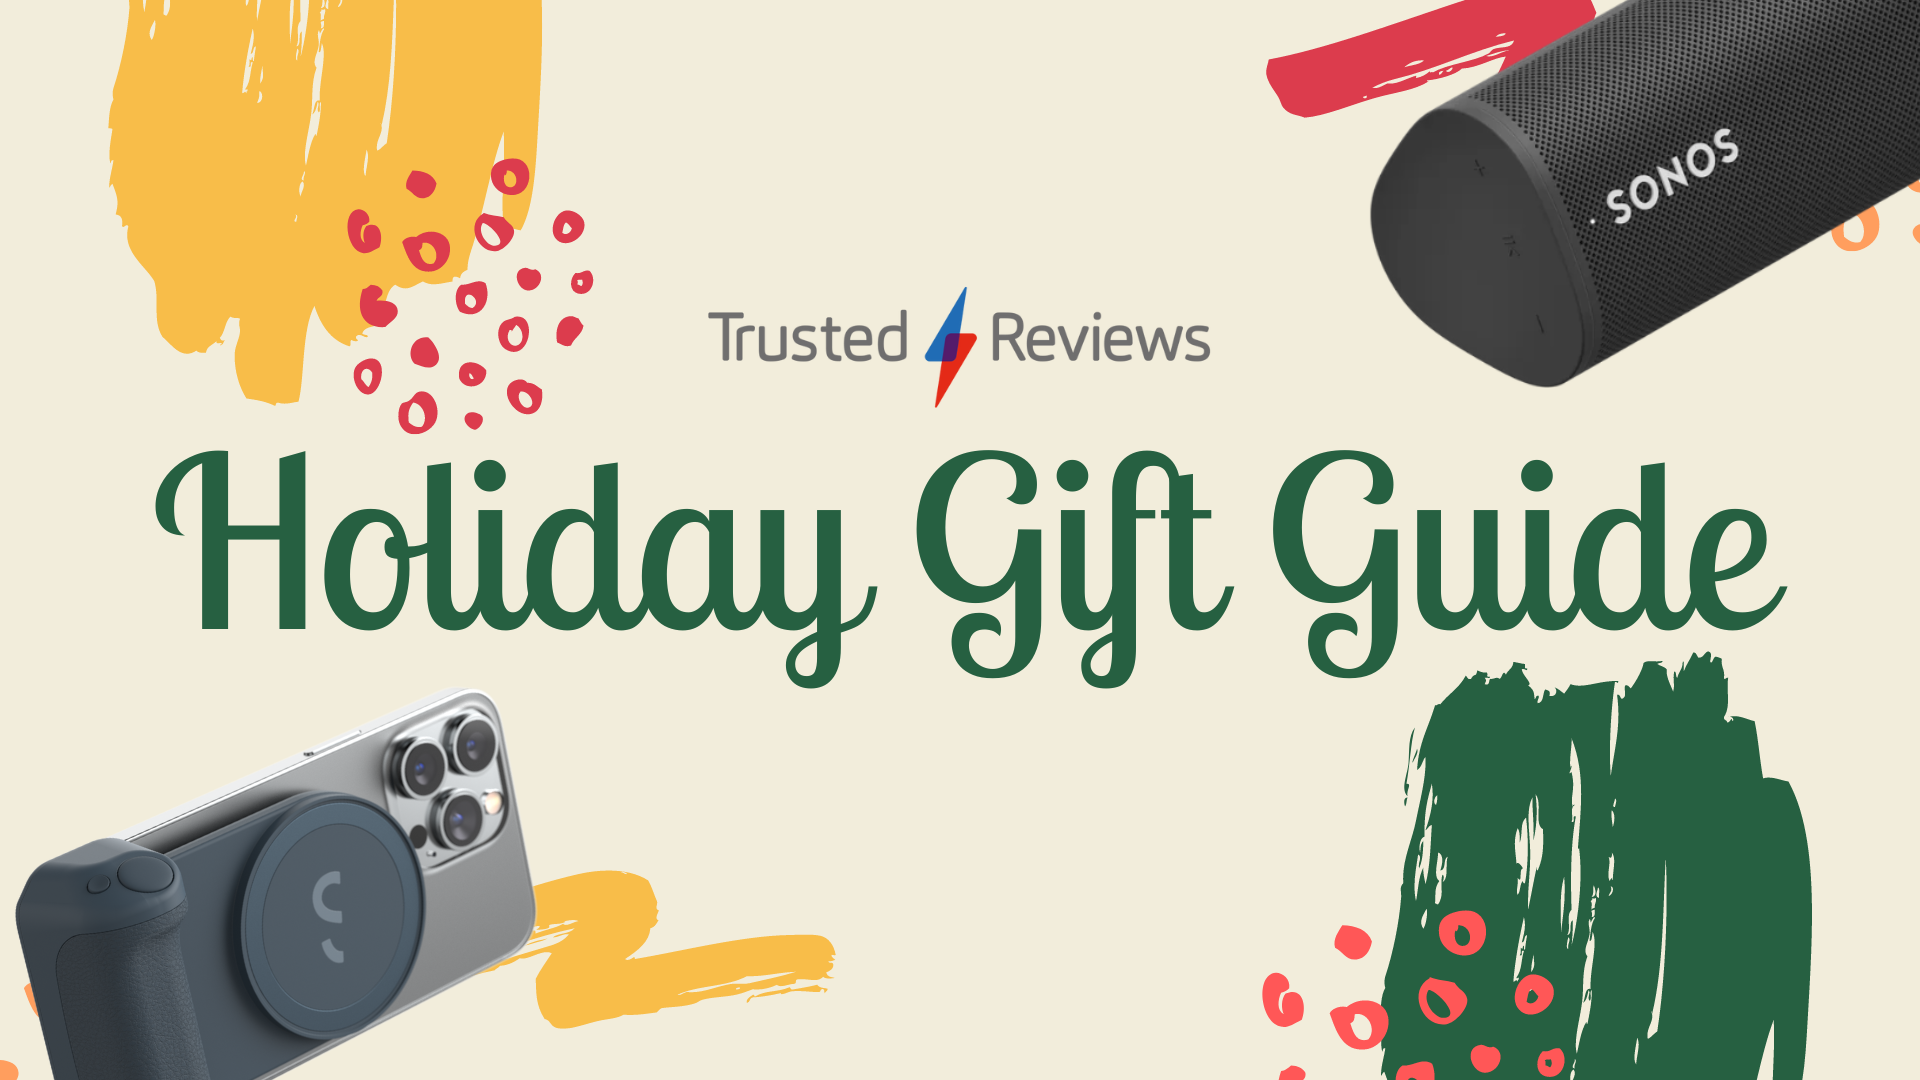 Trusted Reviews Christmas Gift Guide: Games, tablets and speakers